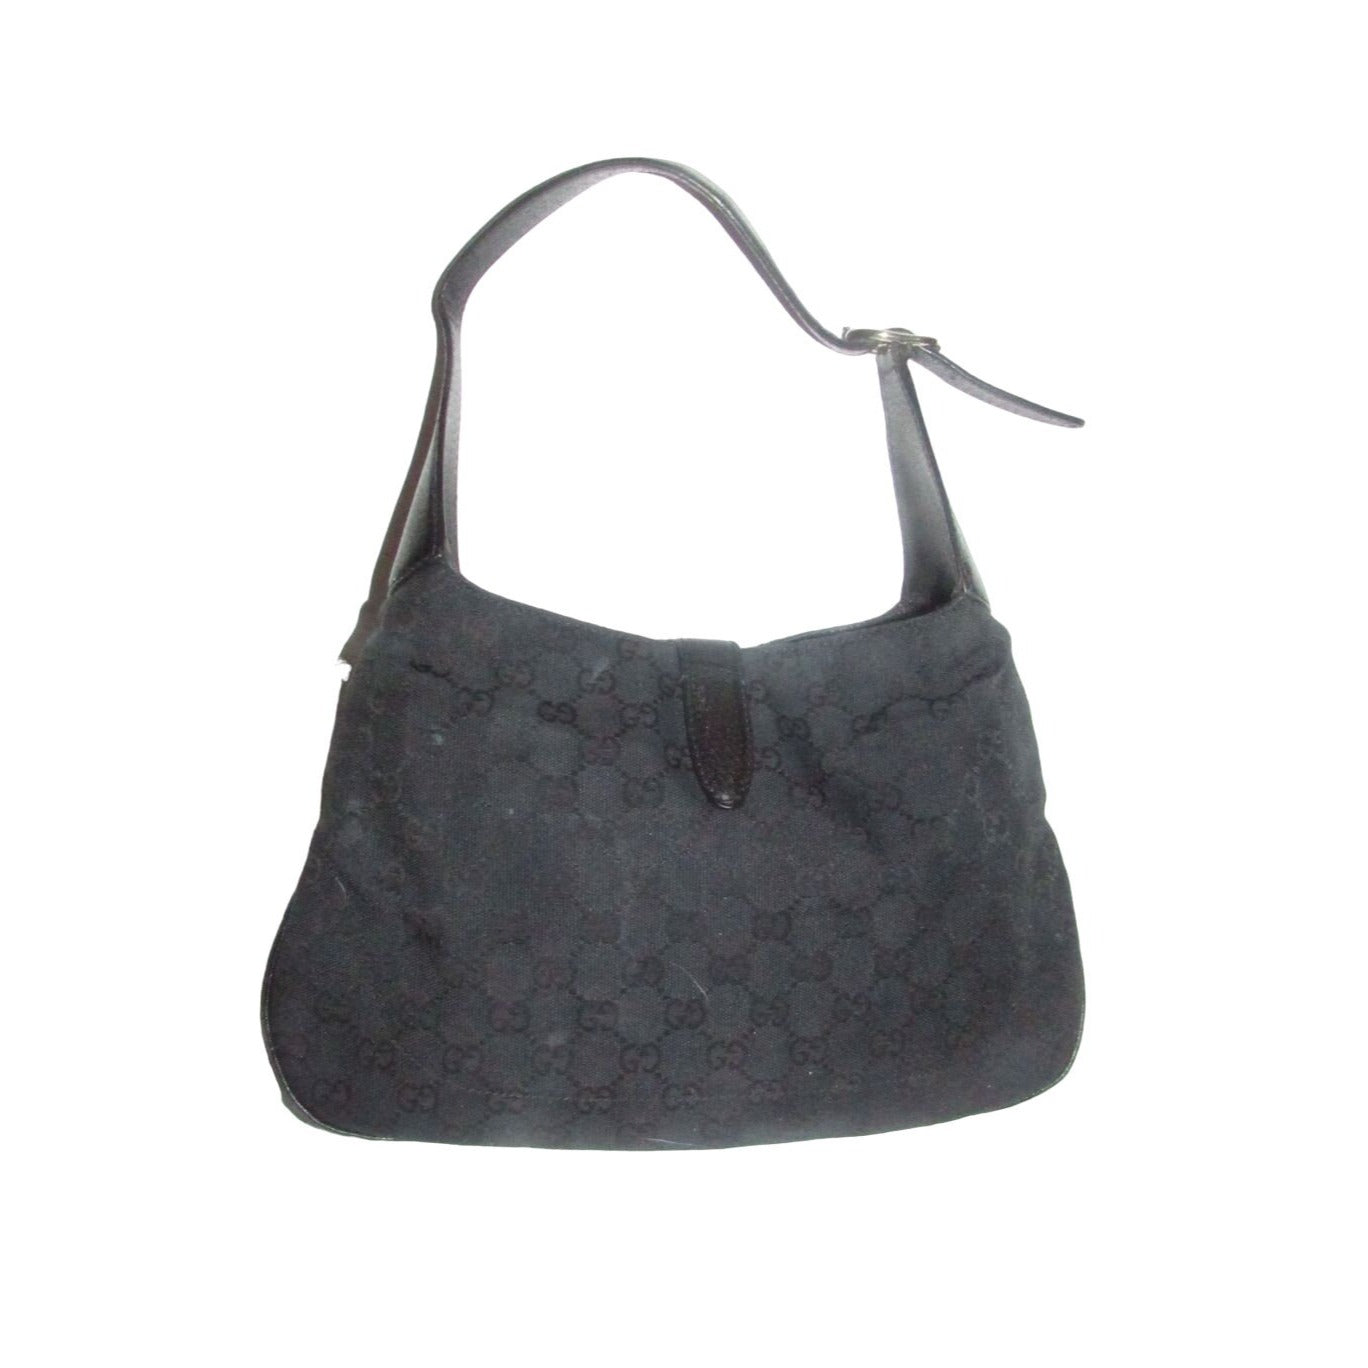 Gucci, large size, black Guccissima print & black leather, 1961 Jackie hobo style, shoulder bag with a gold piston closure